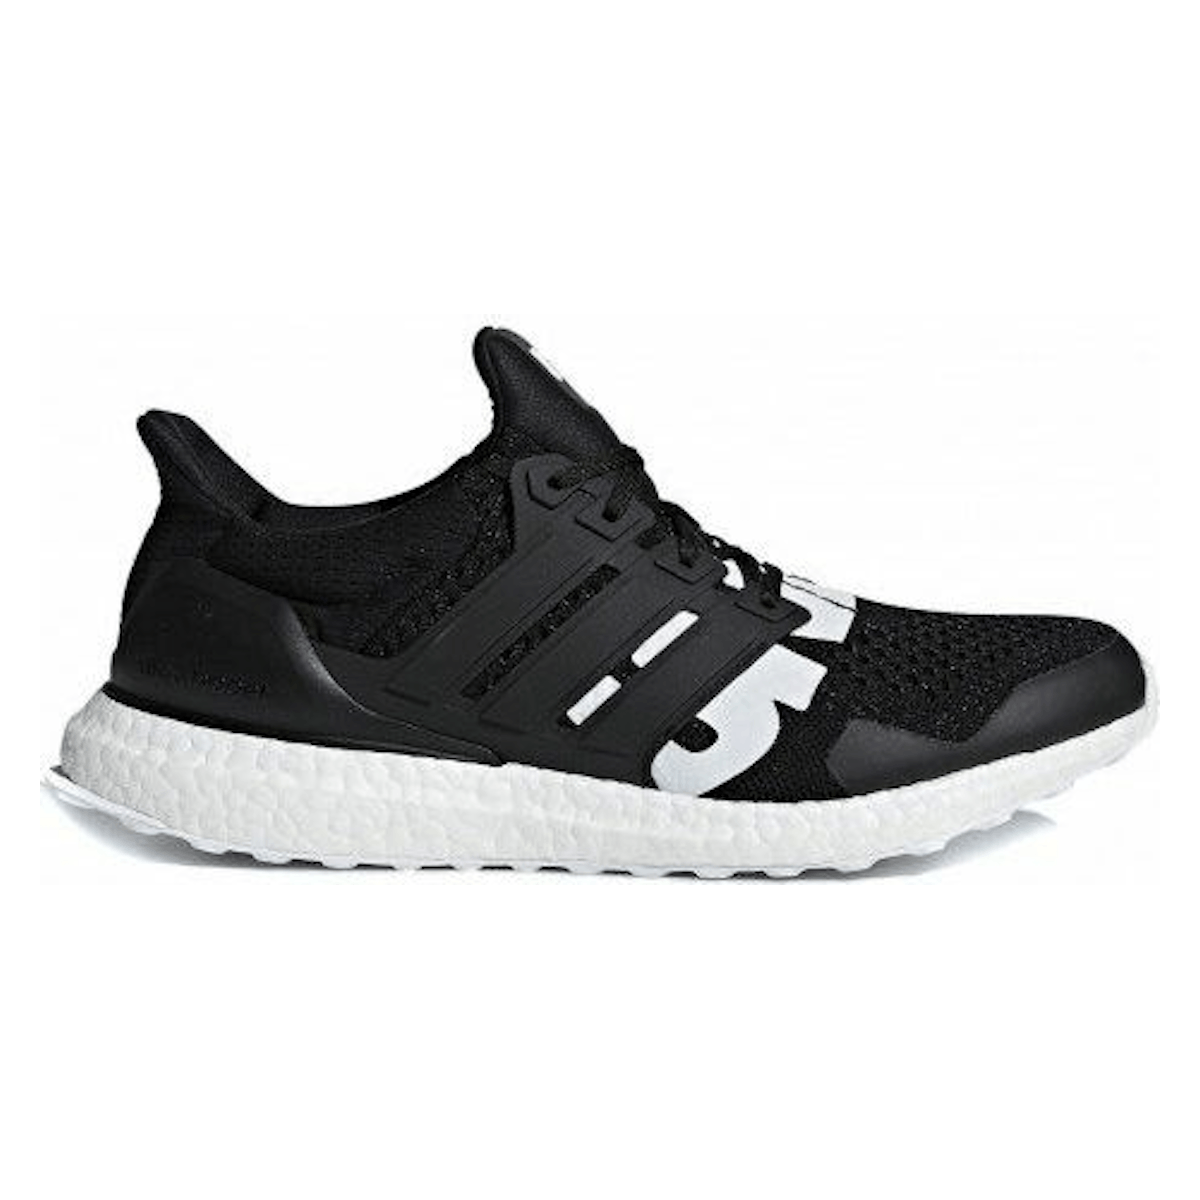 UNDEFEATED x adidas Ultra Boost Black